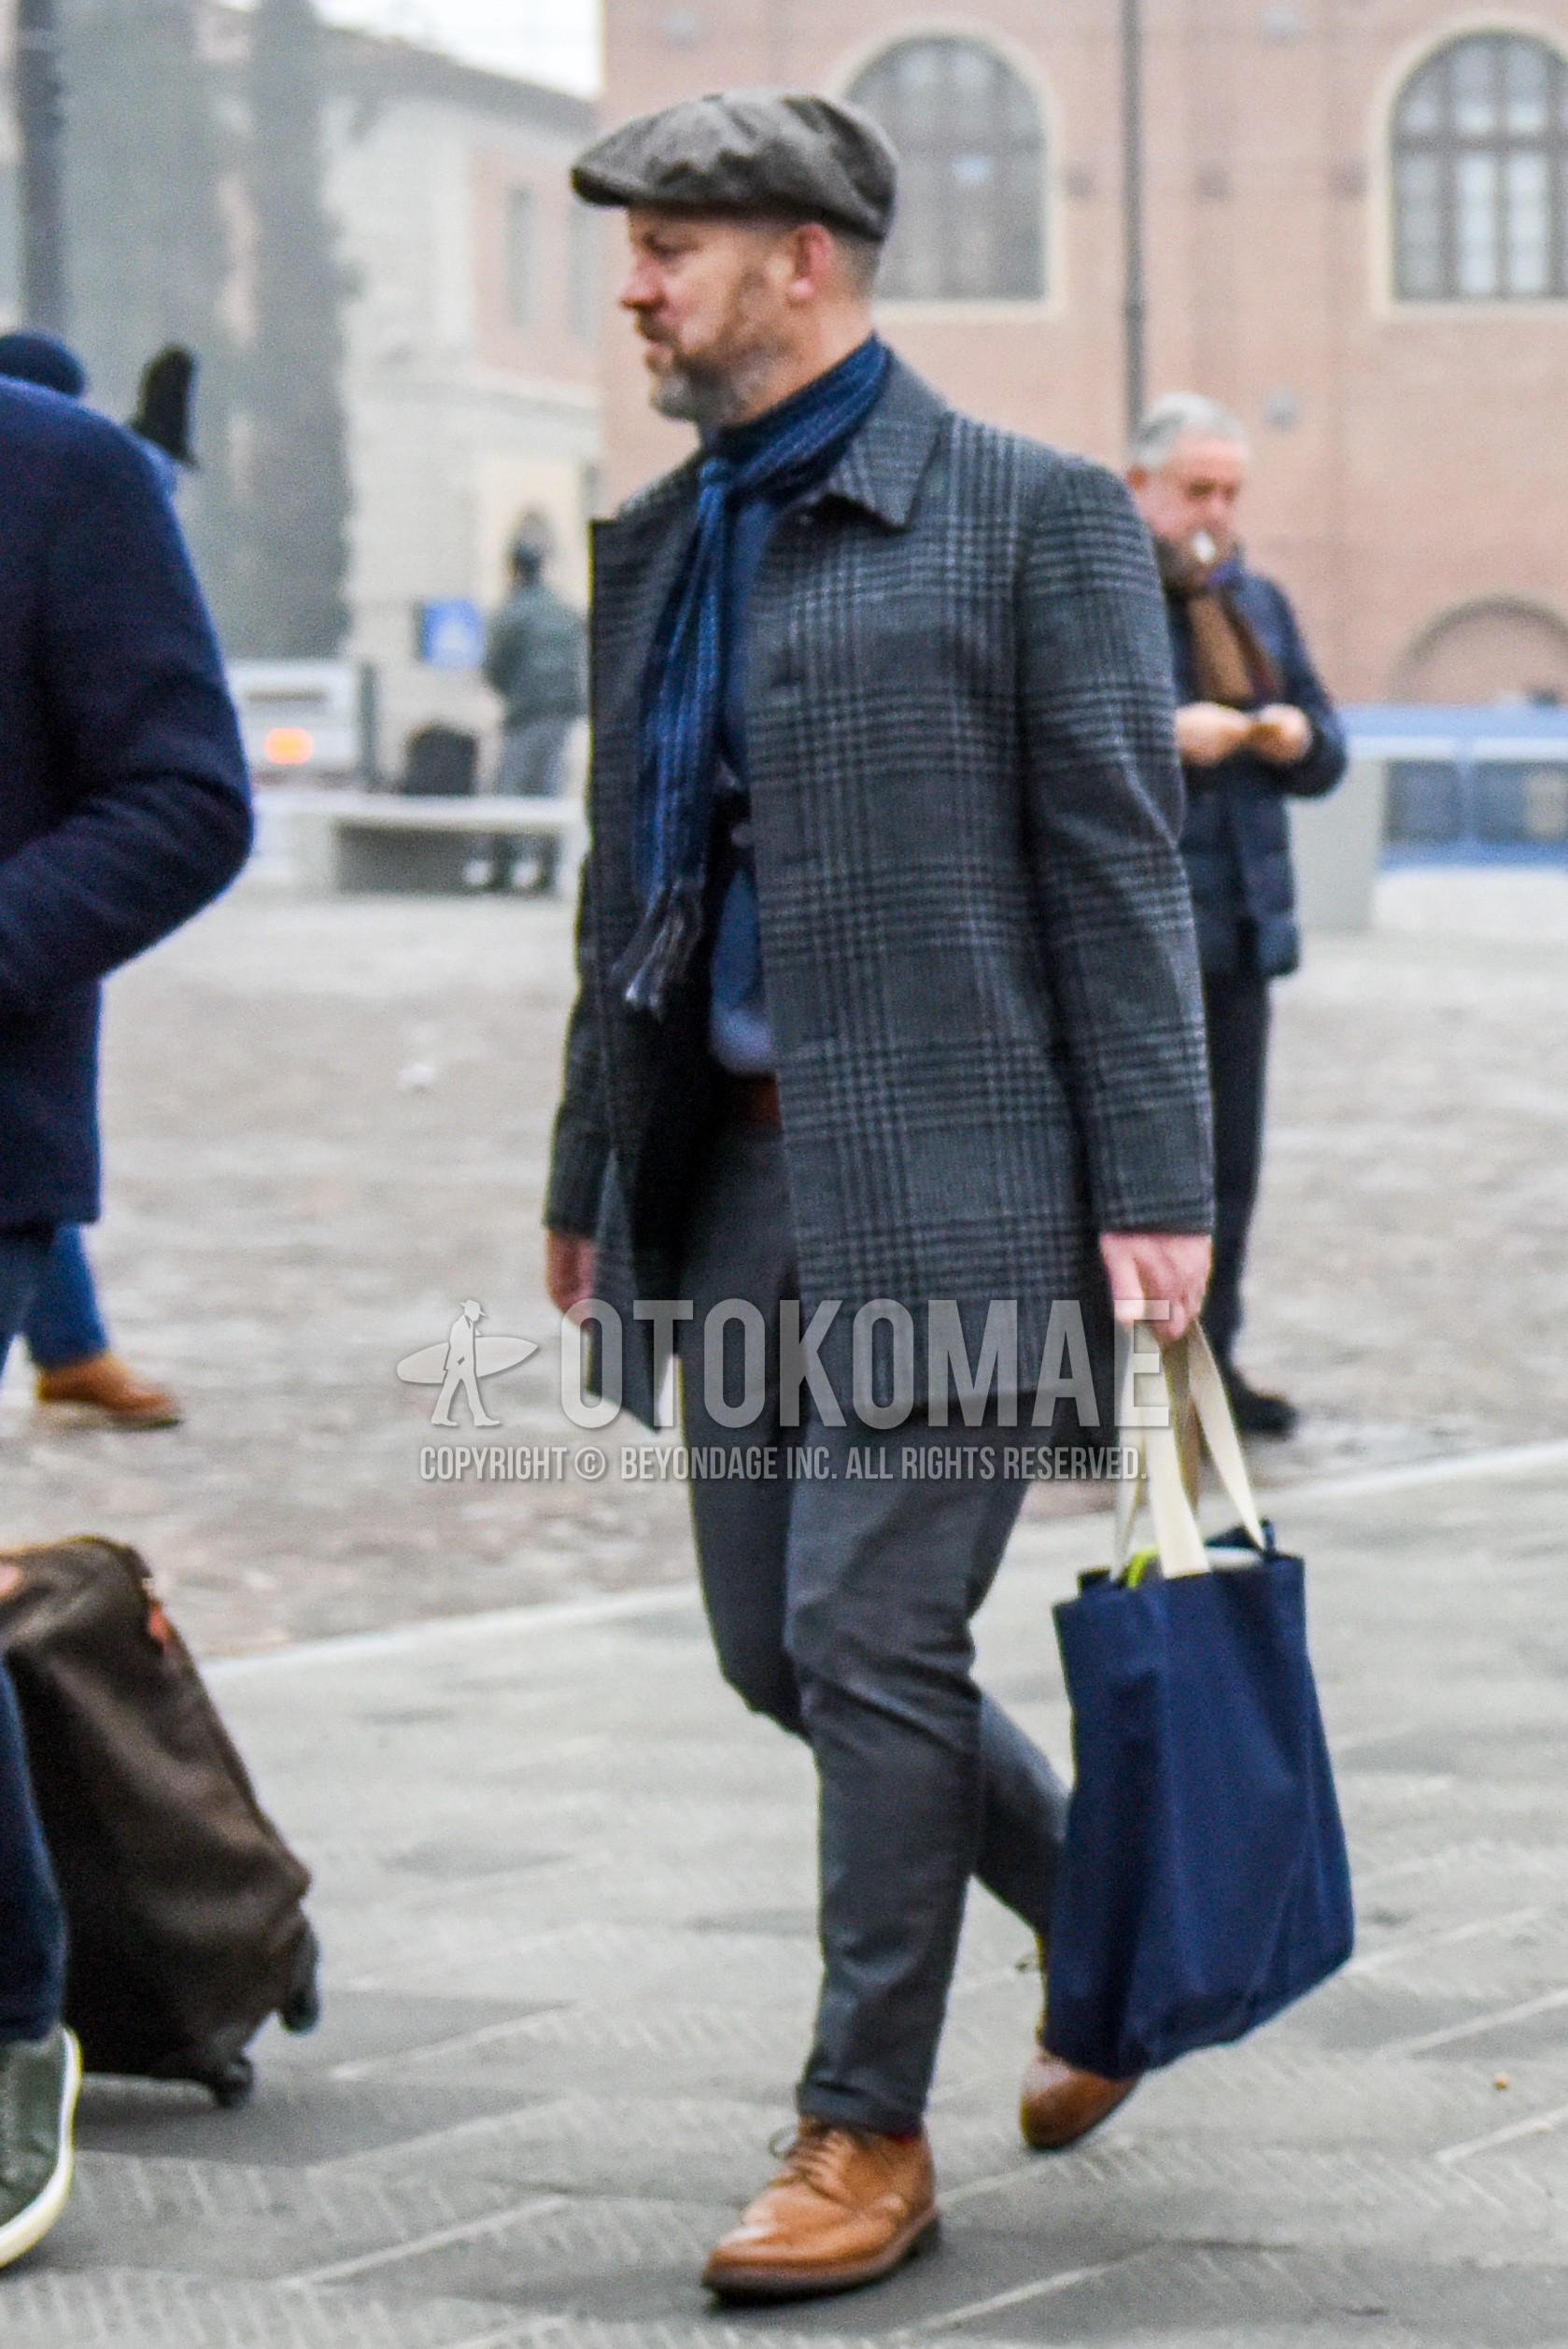 Men's winter outfit with gray plain cap, blue stripes scarf, gray check stenkarrer coat, gray plain slacks, brown wing-tip shoes leather shoes, navy plain tote bag.